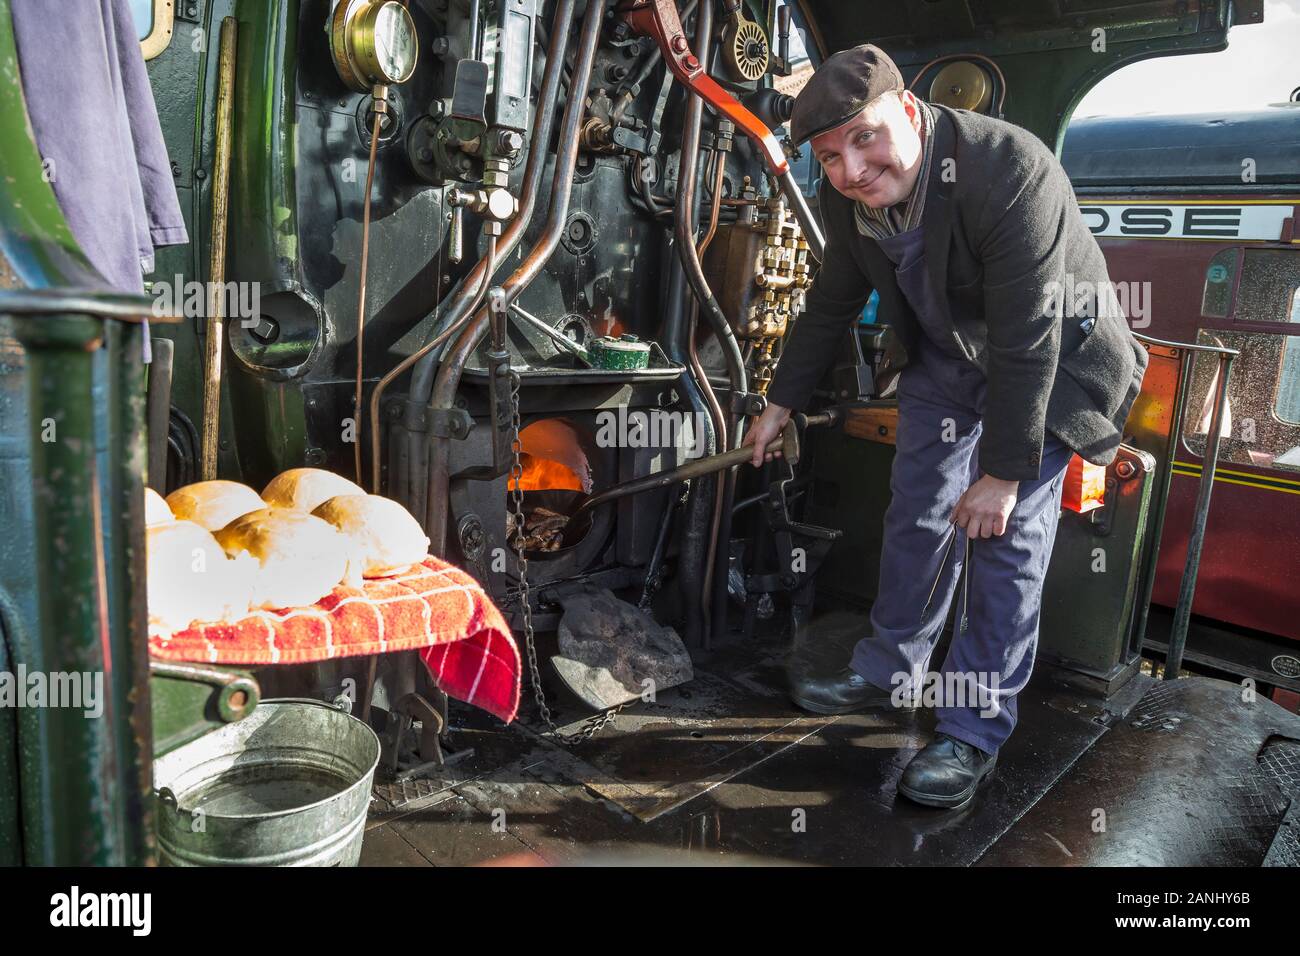 On board steam locomotive cab, driver cooking breakfast for the crew. Stock Photo